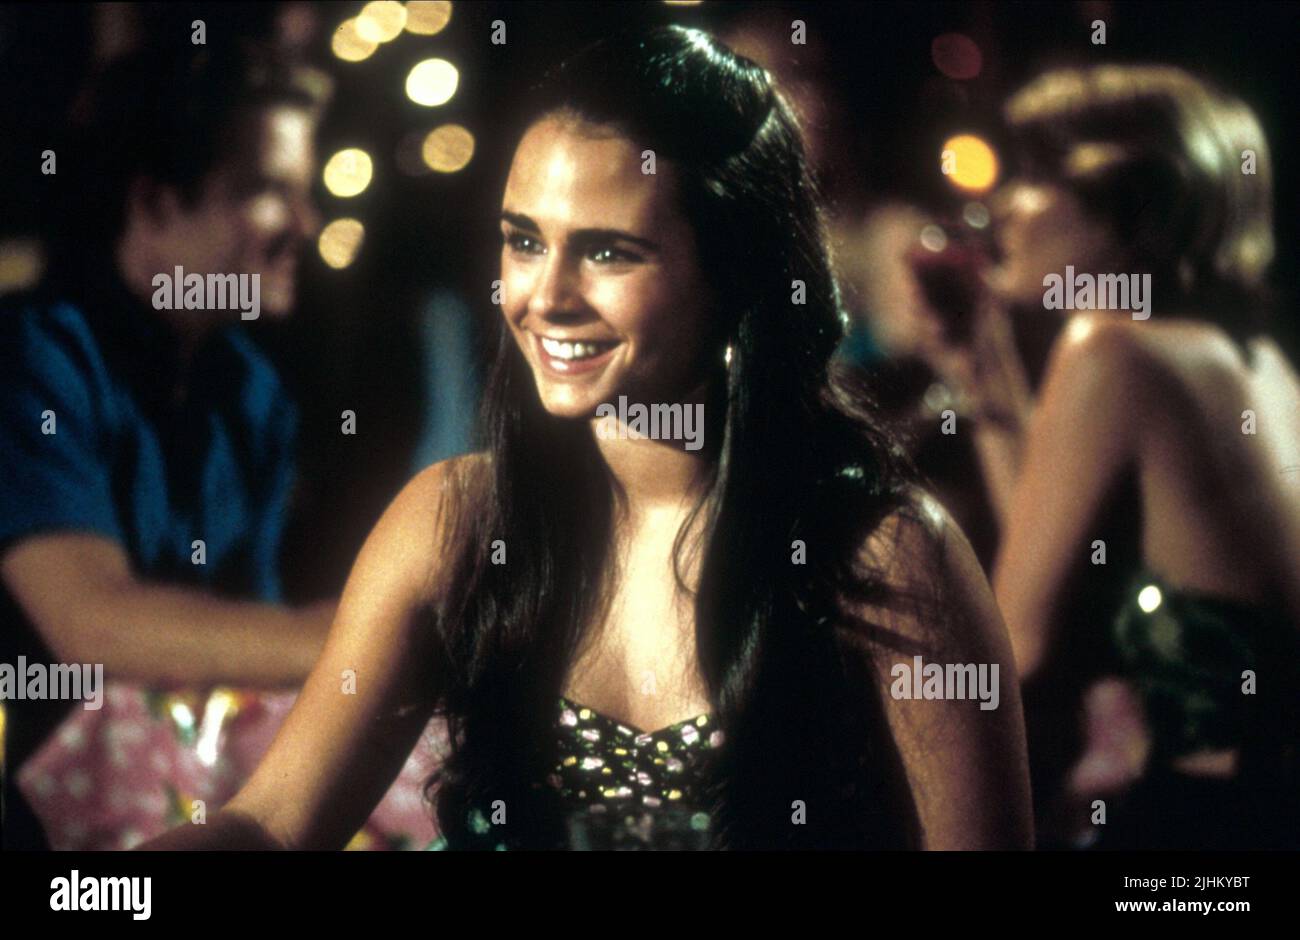 JORDANA BREWSTER, The Fast And The Furious, 2001 Foto Stock